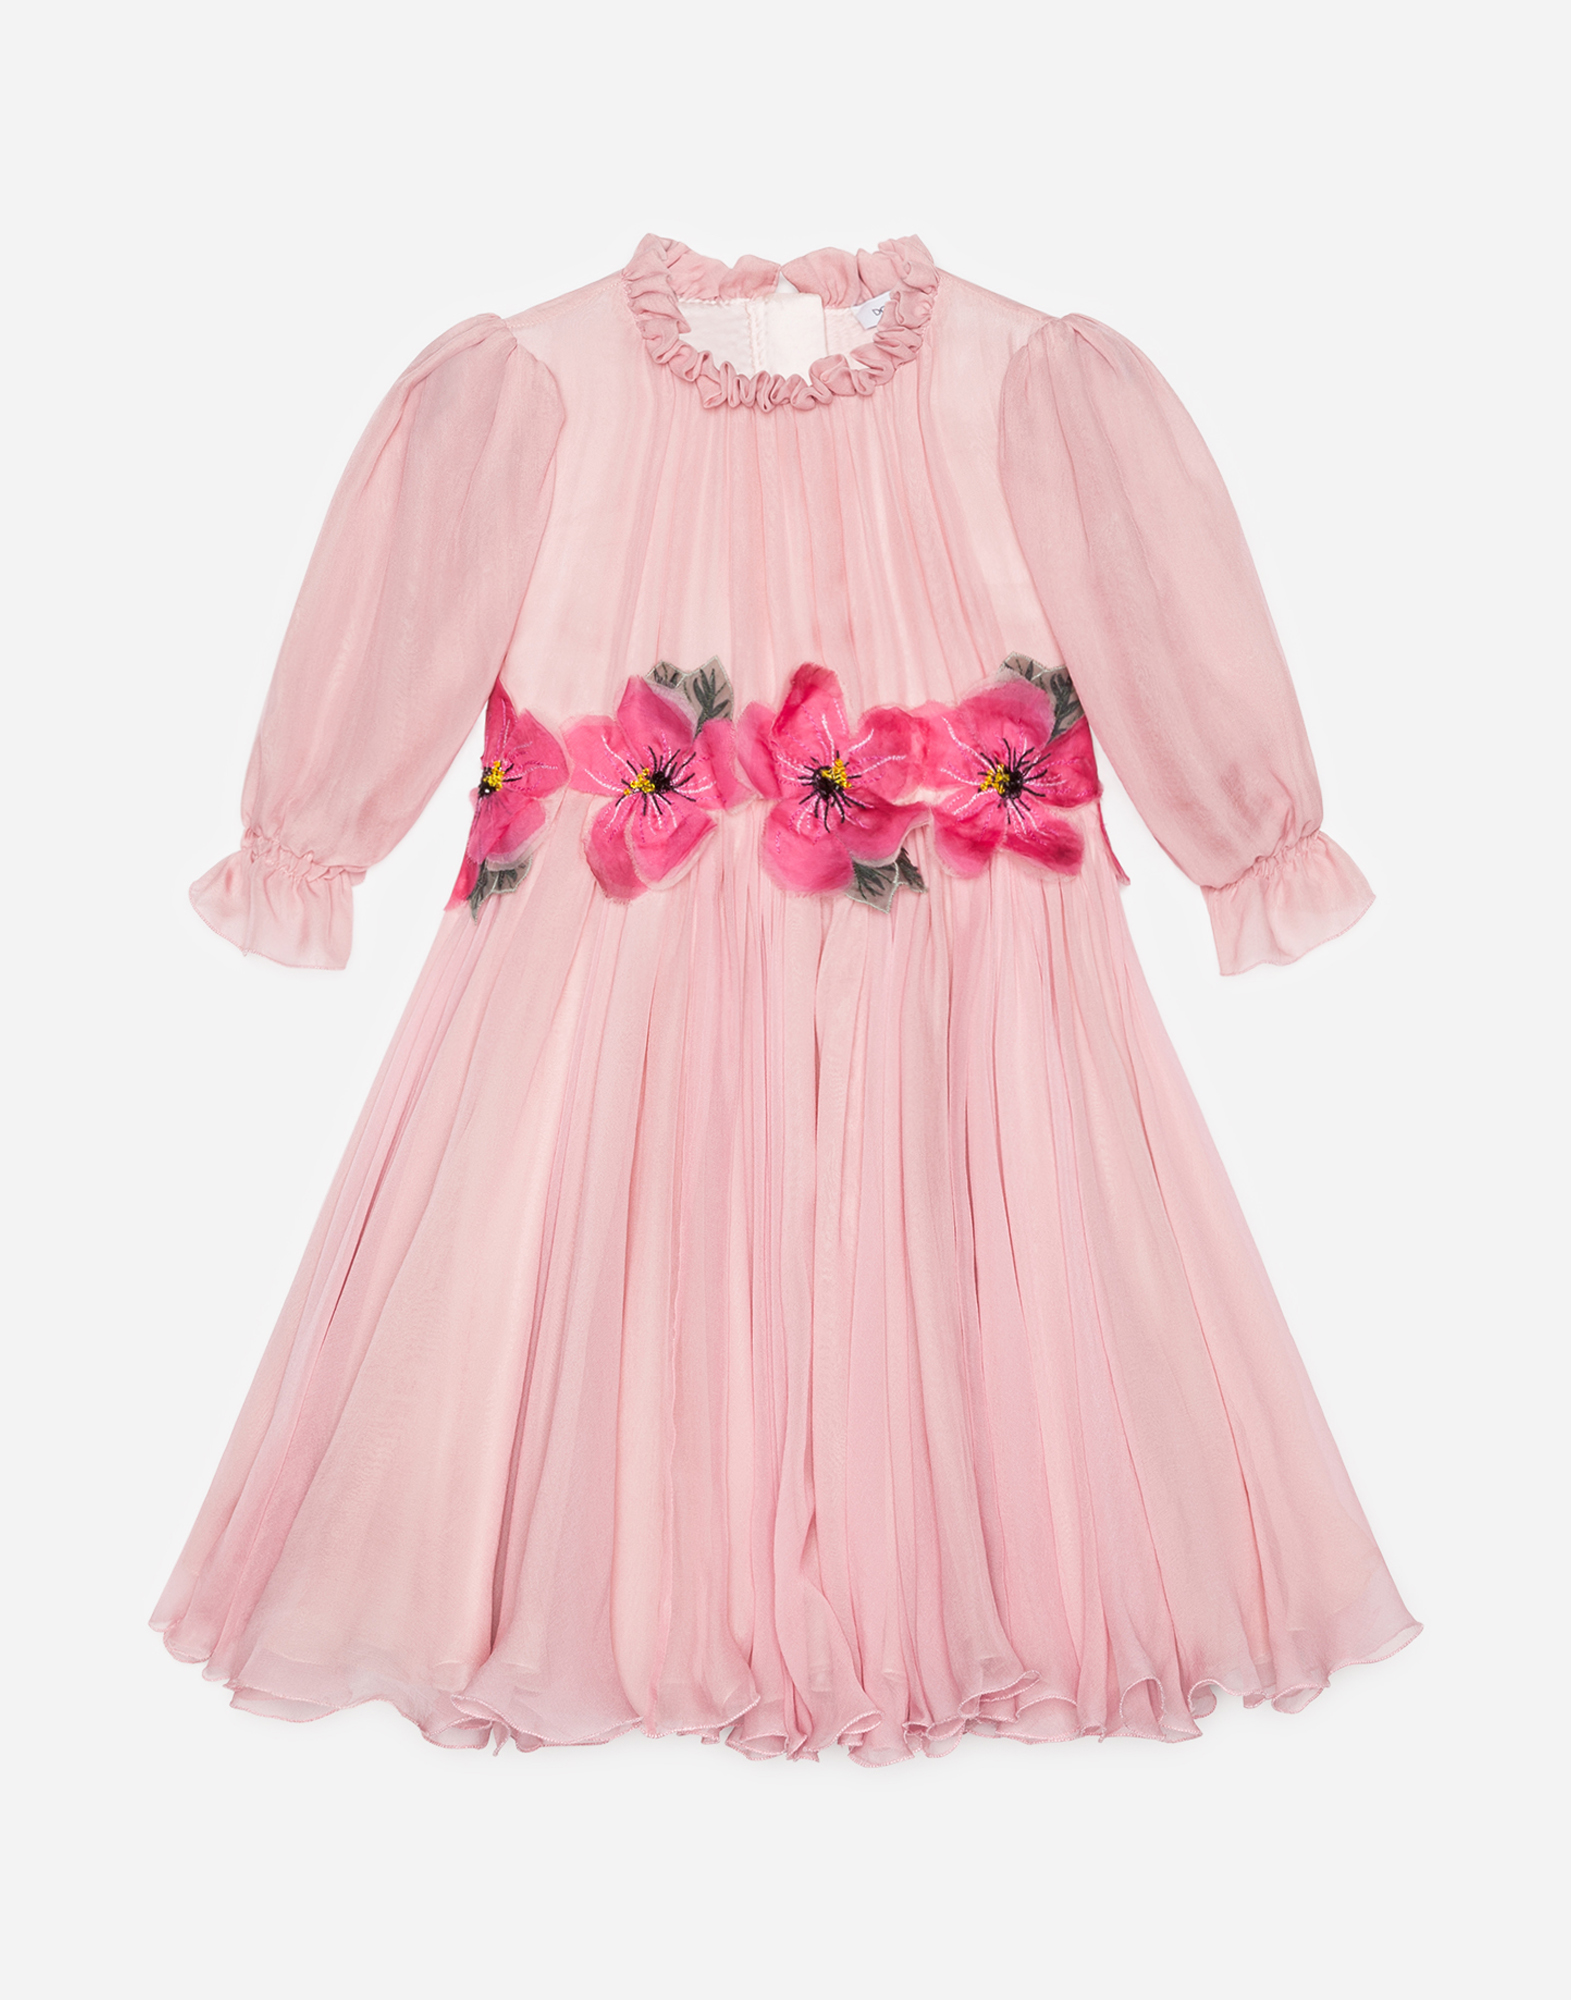 Chiffon dress with embroidered flowers in Pink